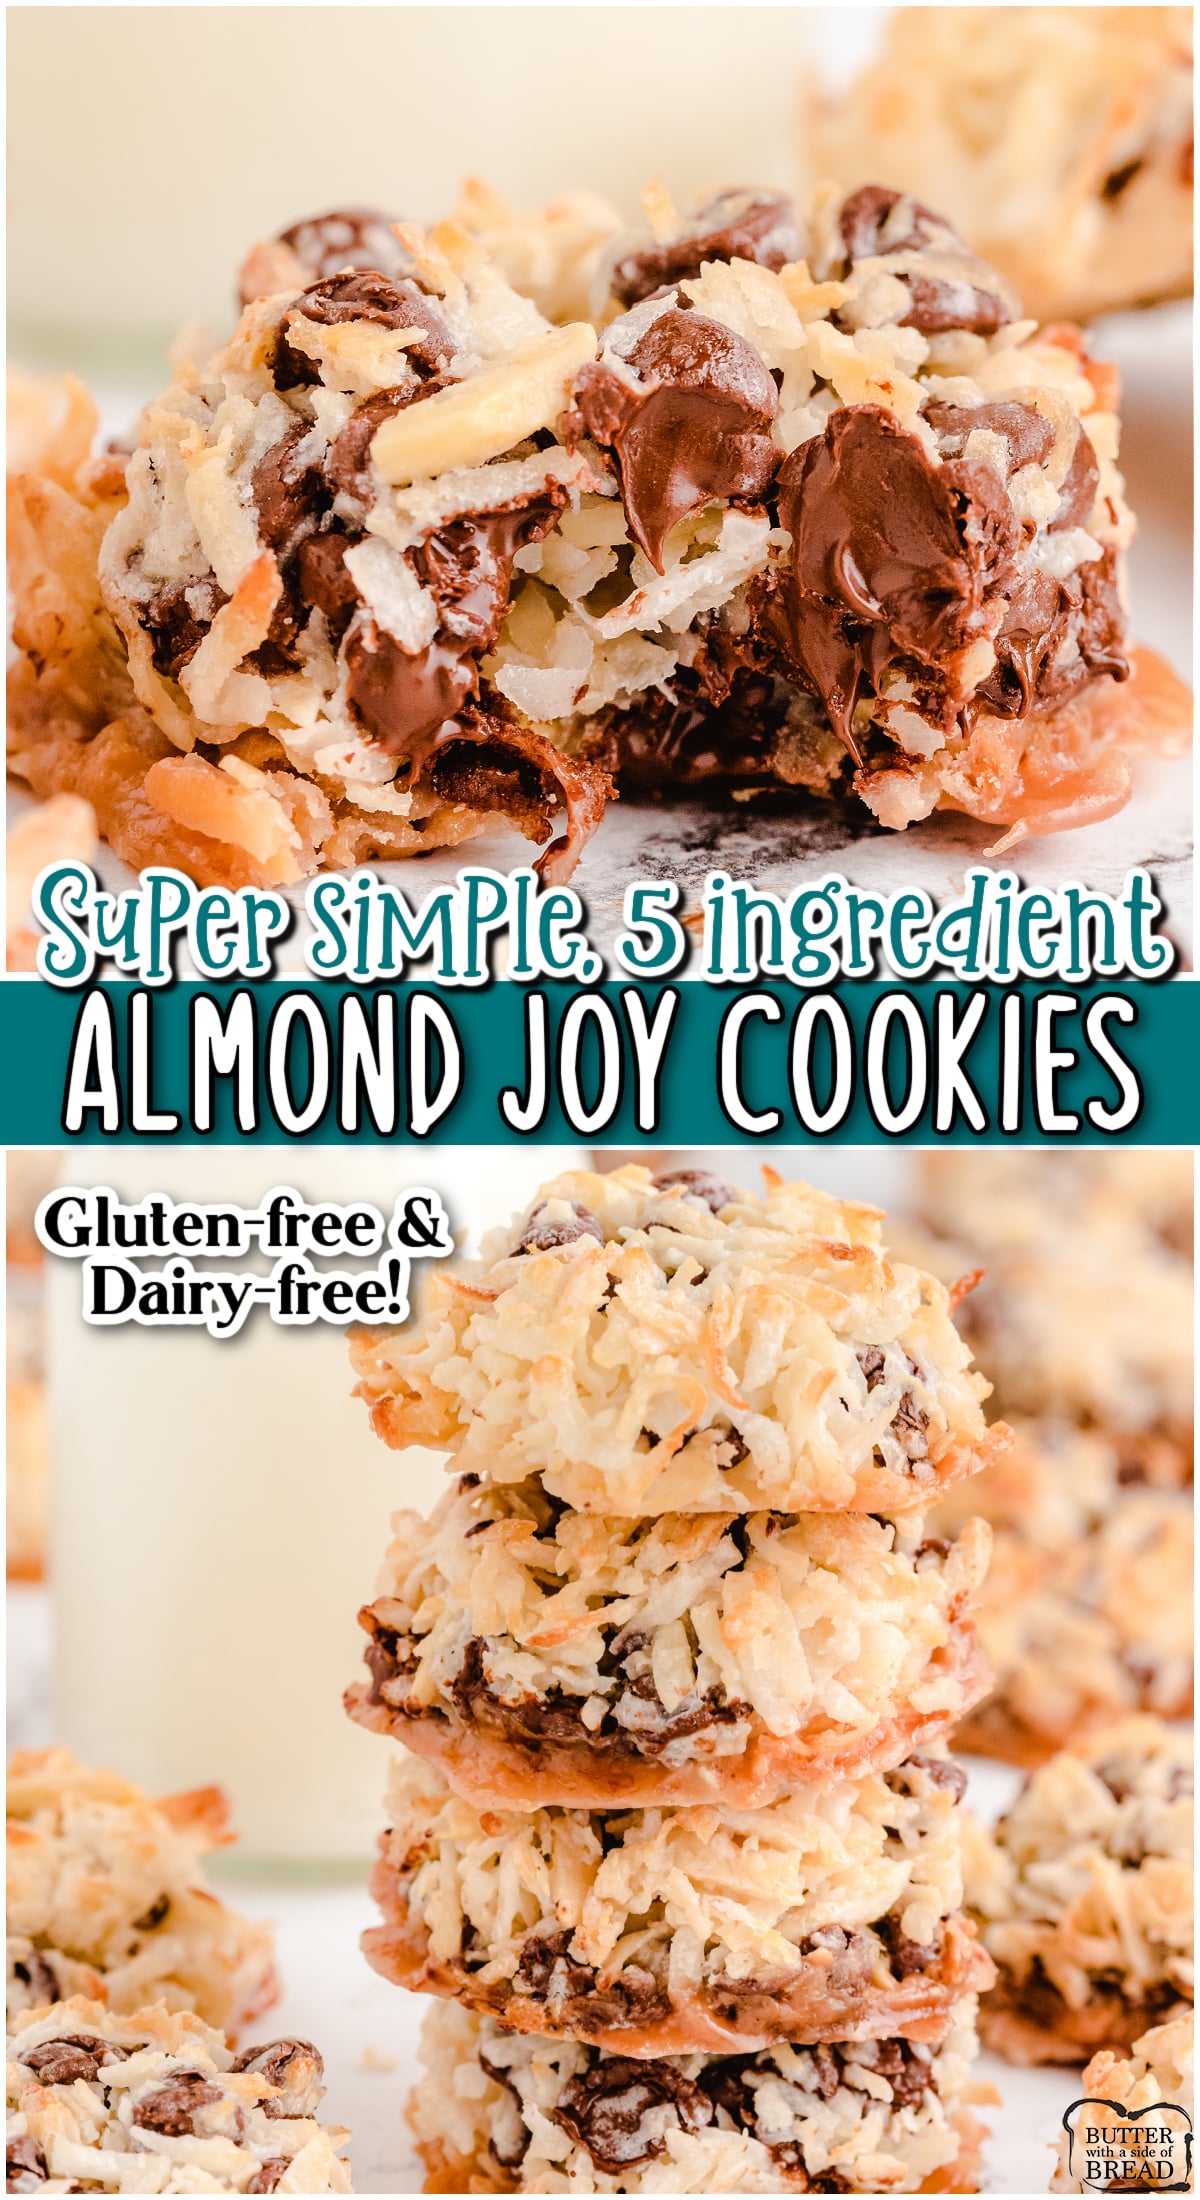 Easy 5 ingredient Almond Joy Cookies are everything you love about the popular candy bar, in cookie form! Simple chocolate coconut cookies made with coconut, sweetened condensed coconut milk, chocolate chips & almonds.